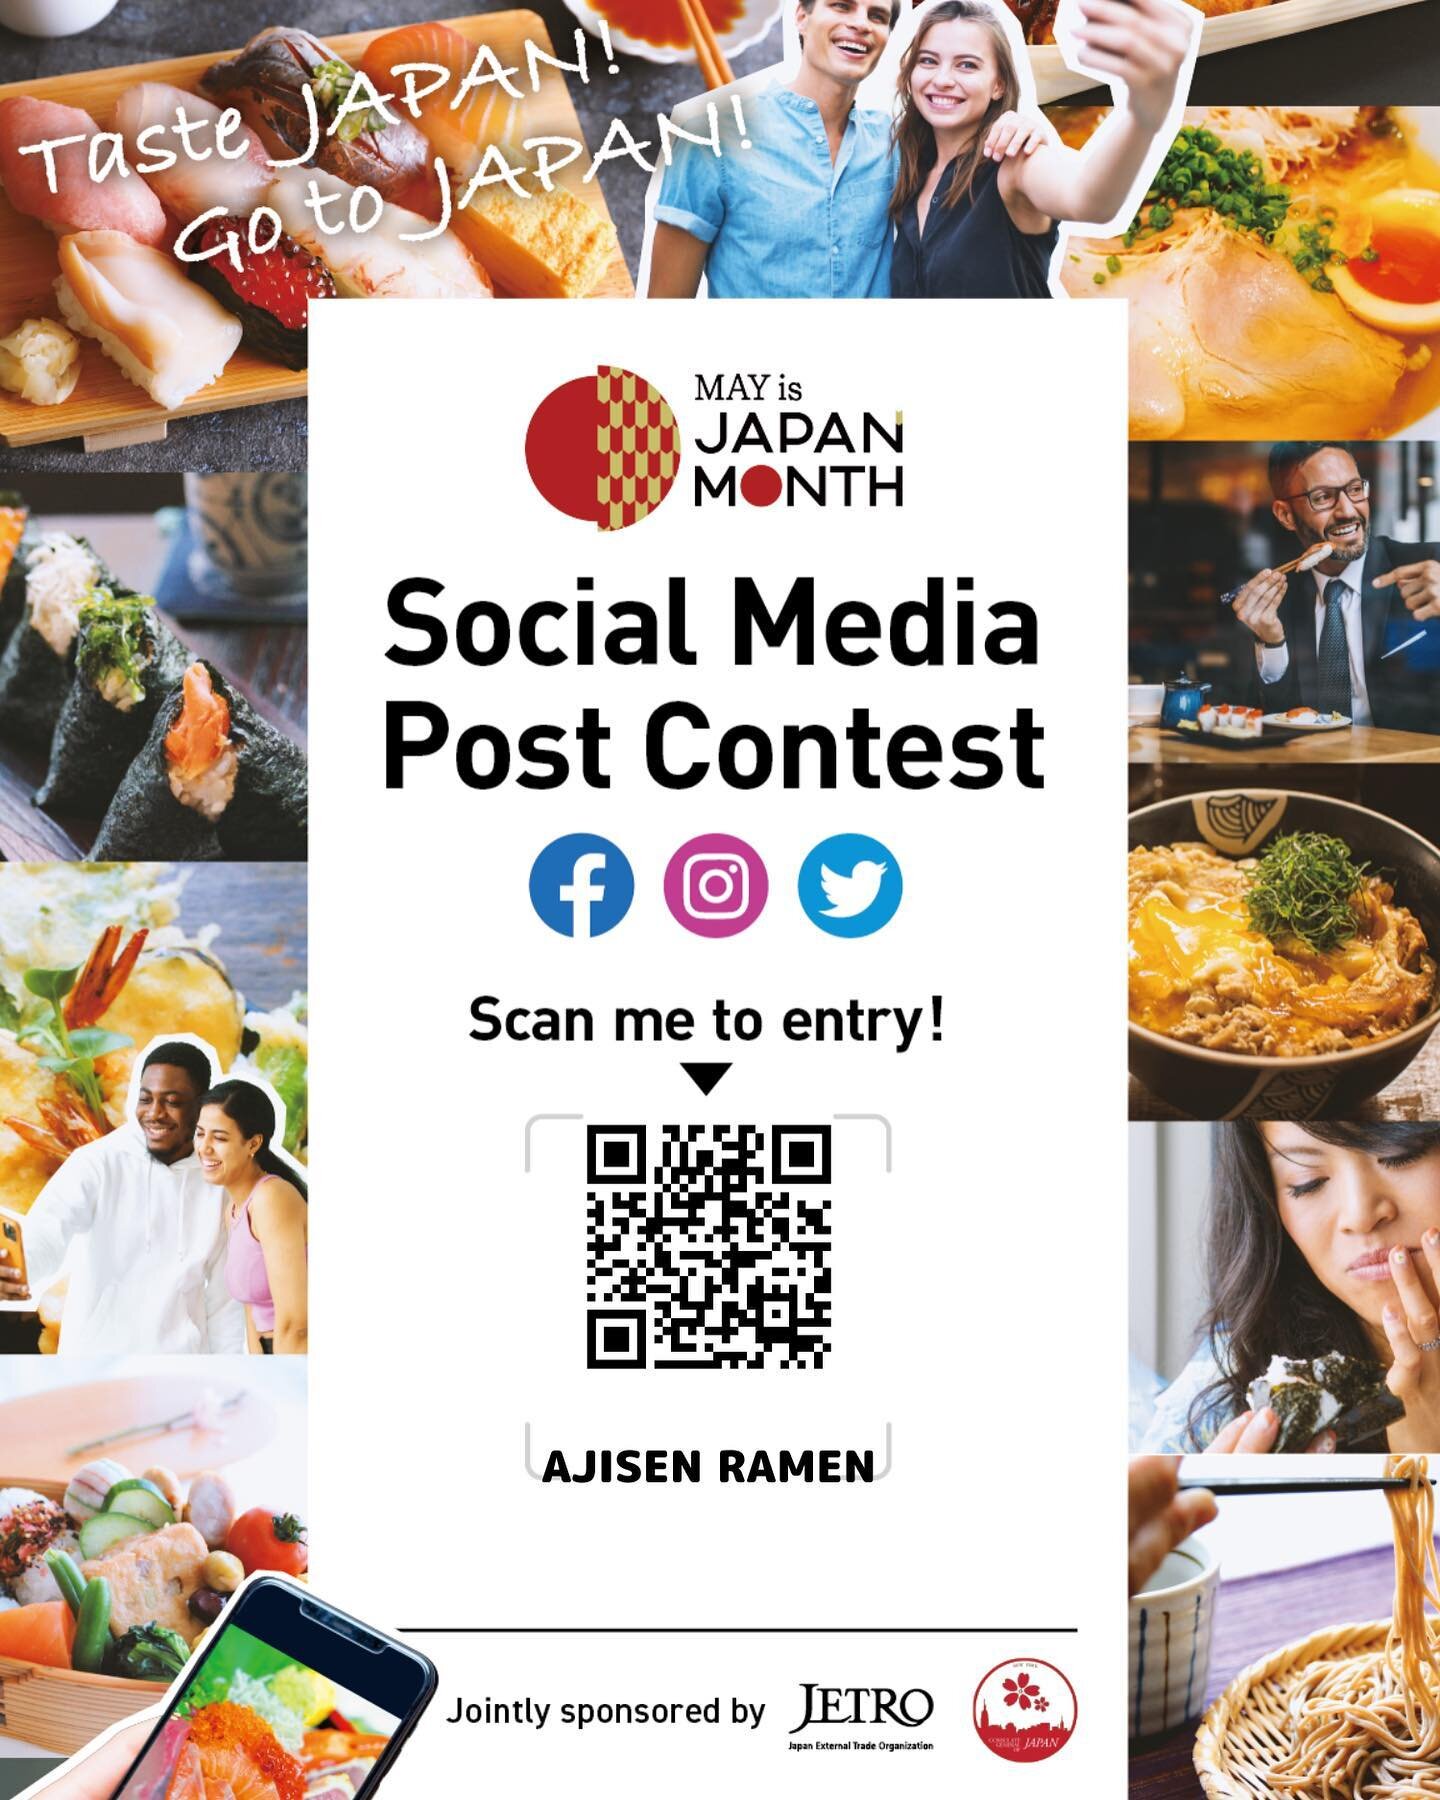 Starting this year, May is now &quot;JAPAN MONTH&quot;. &nbsp;

We are excited to announce that you have a chance to win that grand prize of &quot;A Pair of round-trip air tickets to JAPAN&quot;. &nbsp; Please use the QR code to enter.

Check out jap